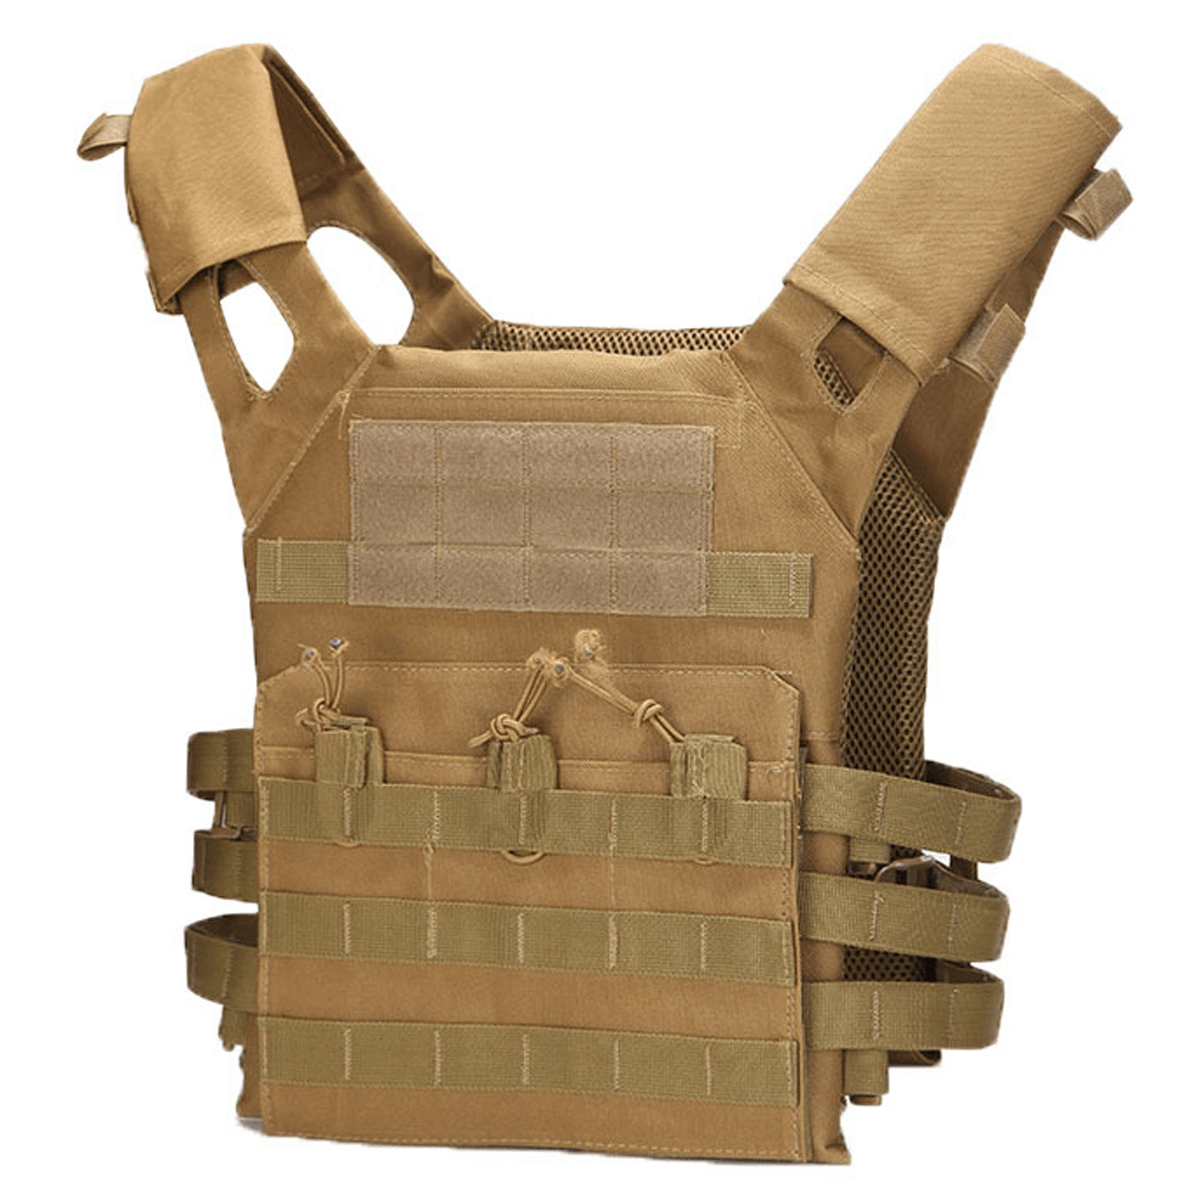 Tactical MOLLE Vest Airsoft Paintball Vest Adjustable CS Field Training Vest Chest Protector